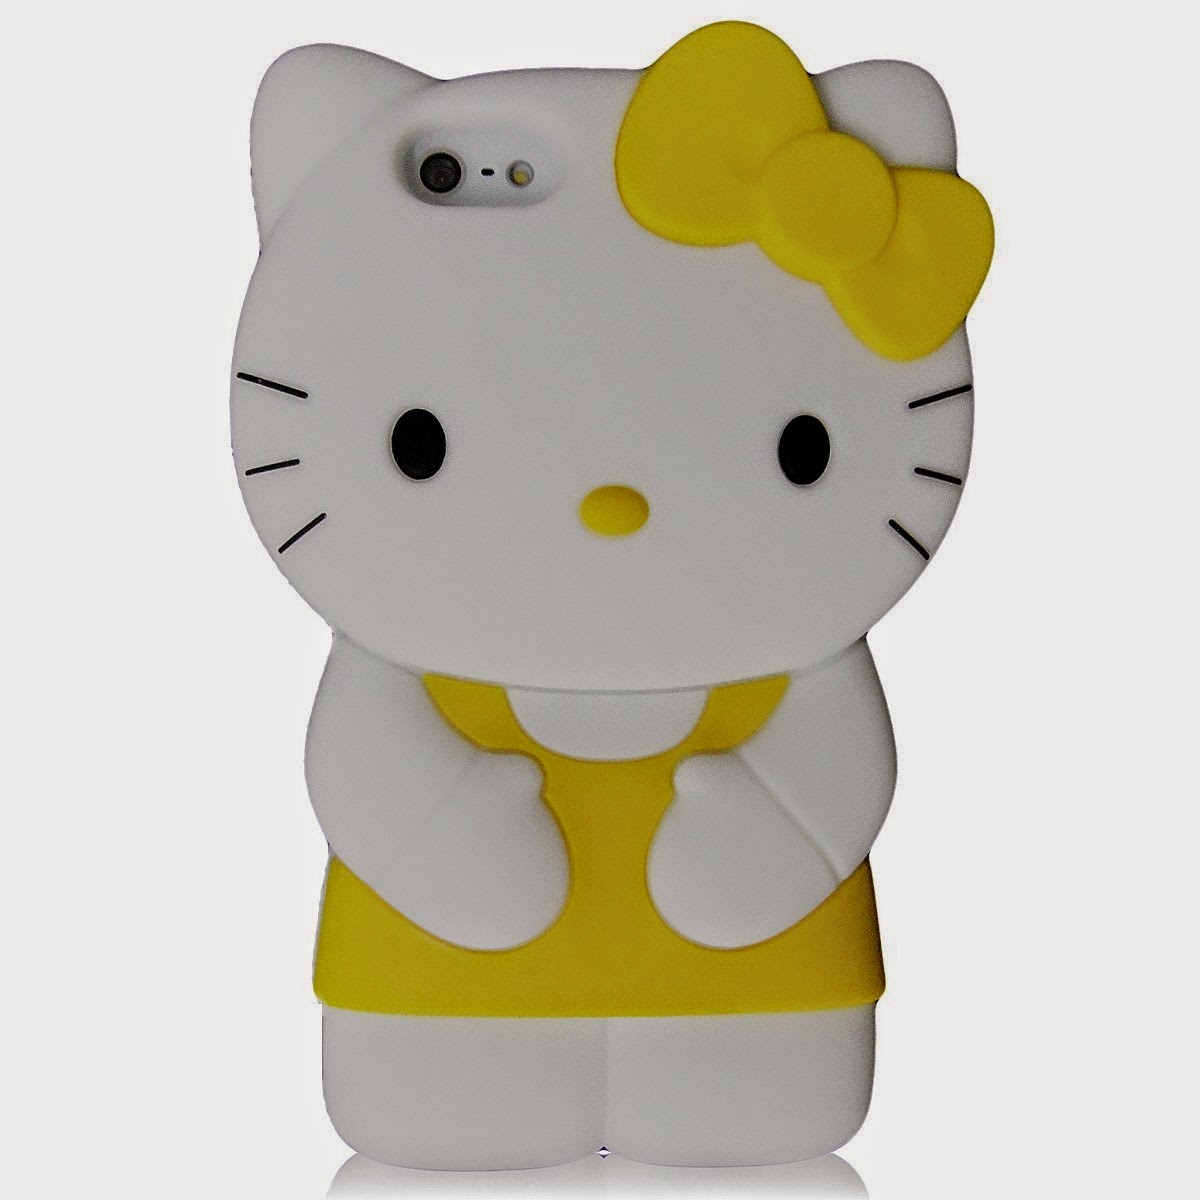 Kitty 3D Silicone Case Cover for New Iphone 5 Xmas gift